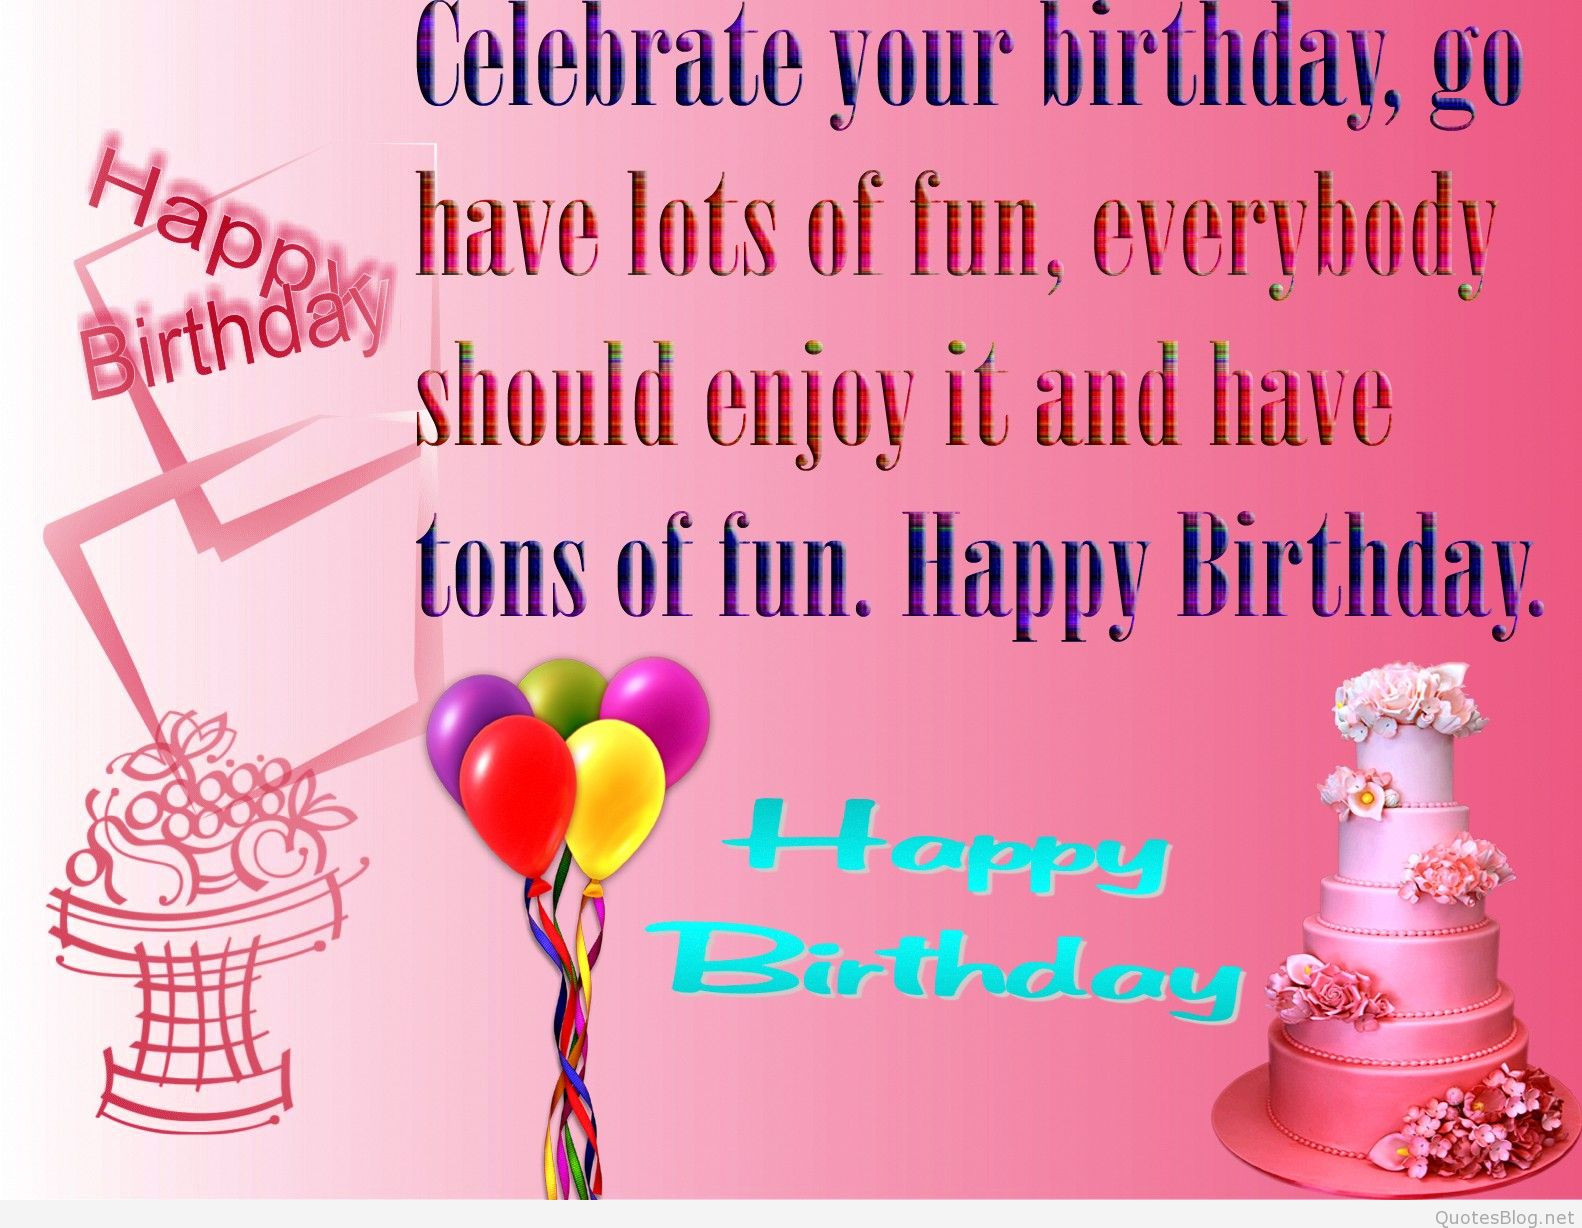 Happy Birthday Image Quotes
 Happy birthday quotes and wishes cards pictures